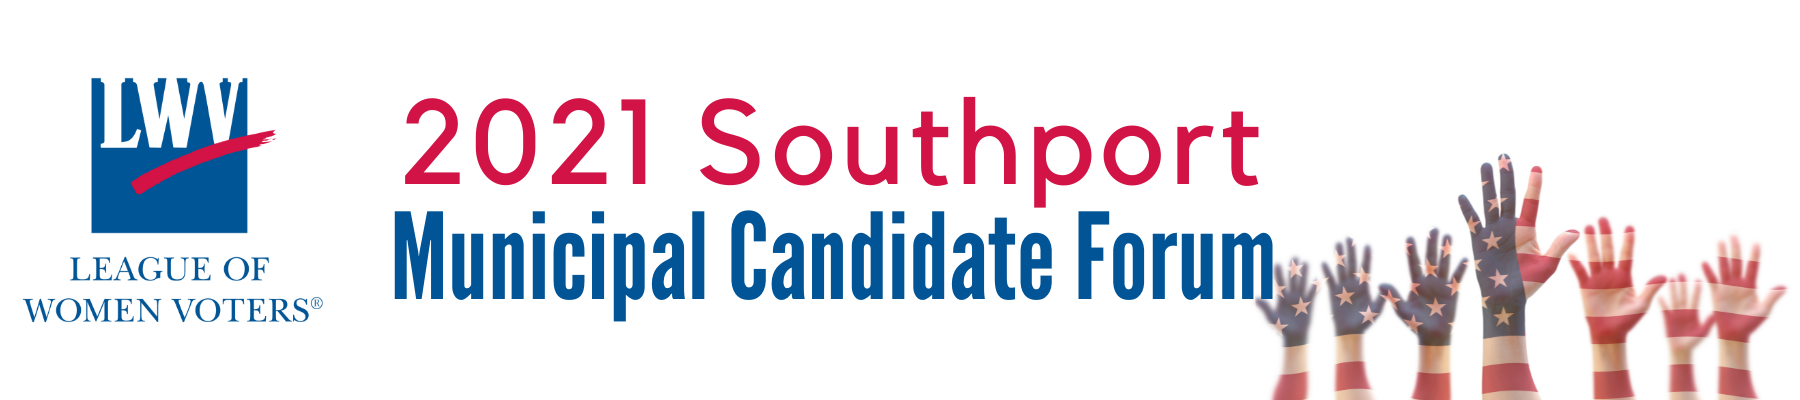 Southport Candidate Forum